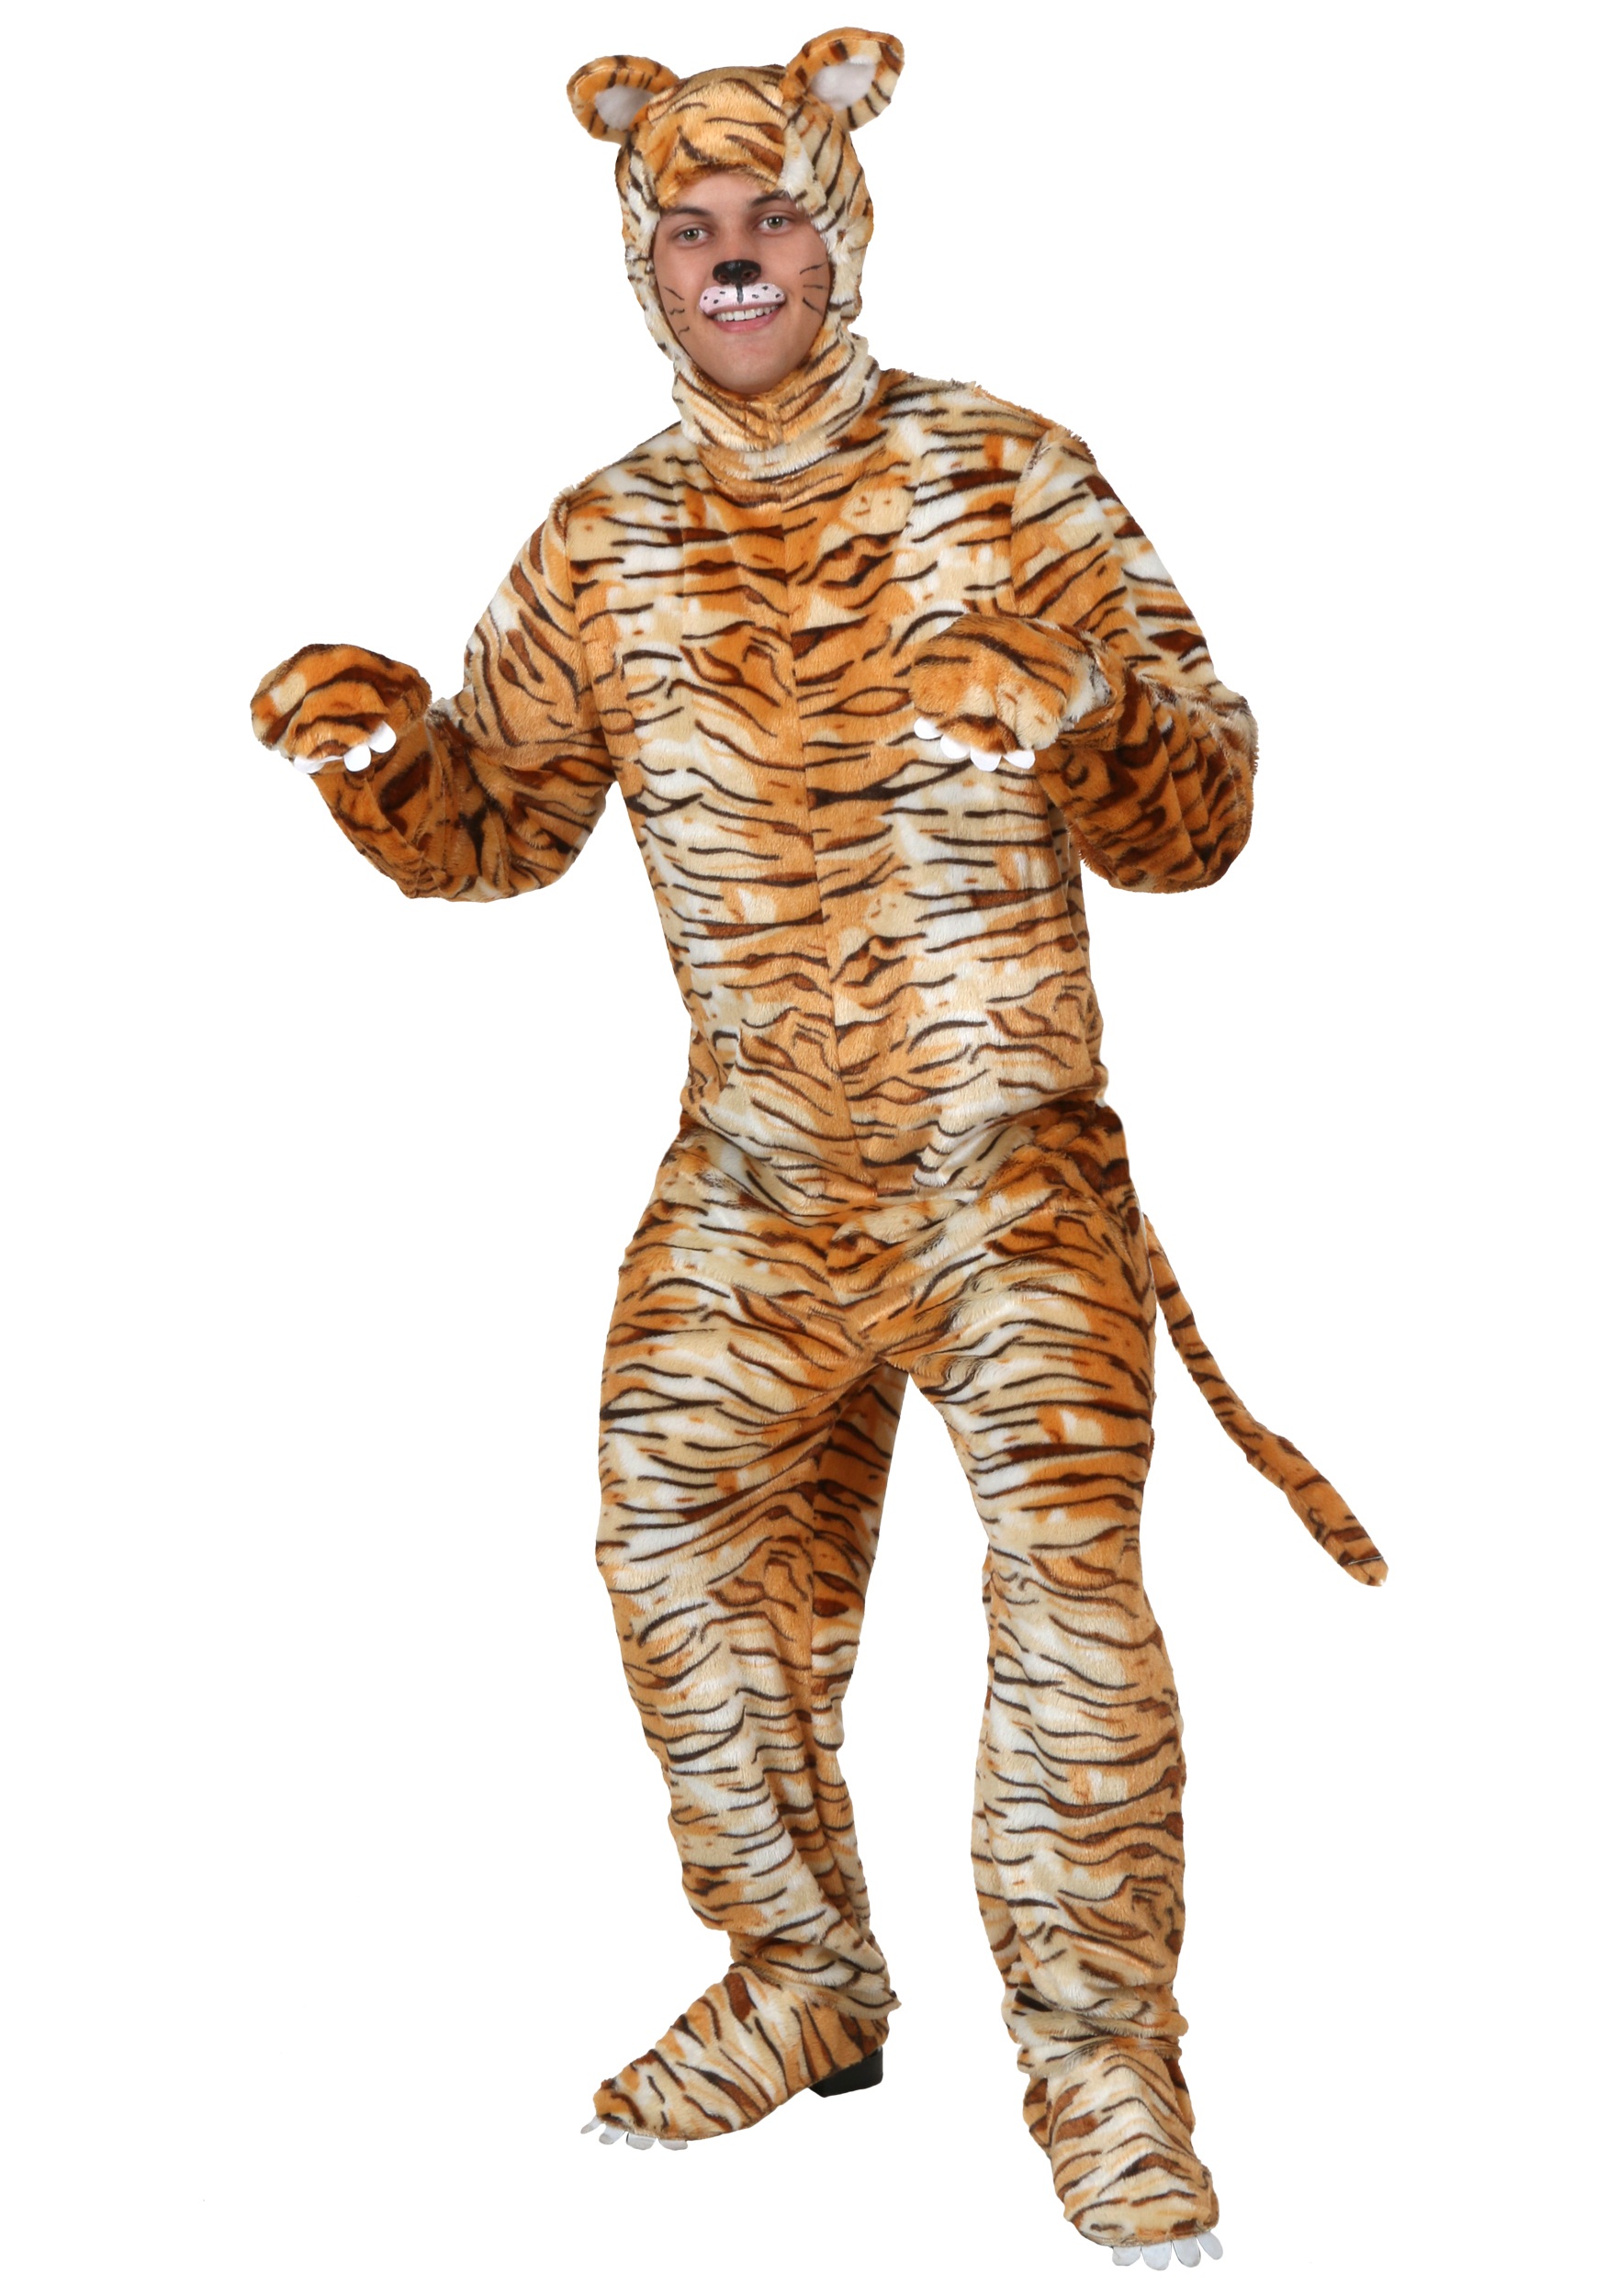 Photos - Fancy Dress FUN Costumes Plus Size Tiger Costume for Adults Orange/Beige